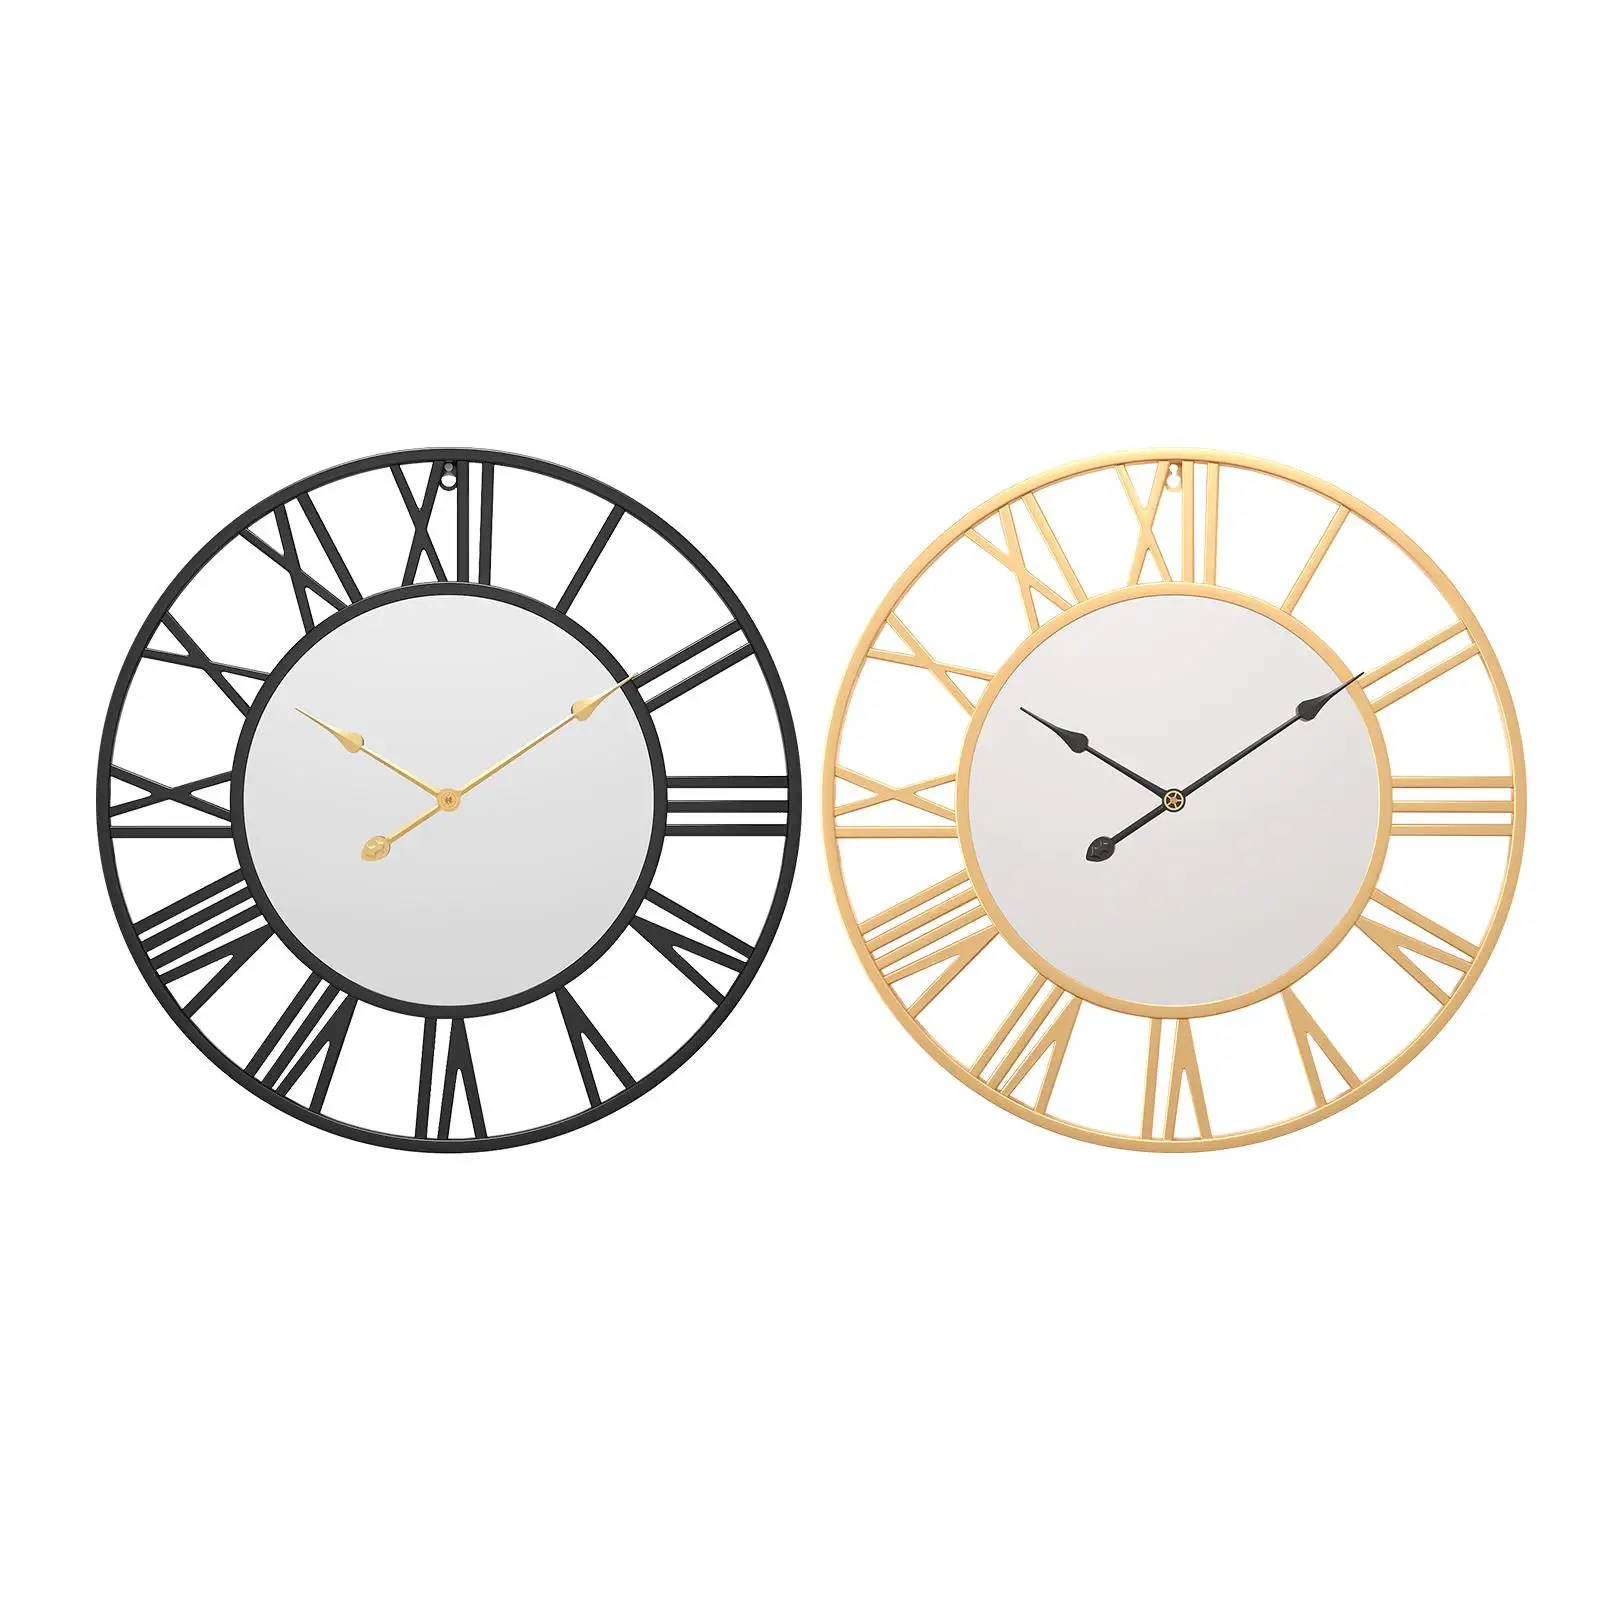 Silent Clock Decoration Roman Numerals 12H Display Round for Hotels Living Room Seniors Boys Girls Adults Kids